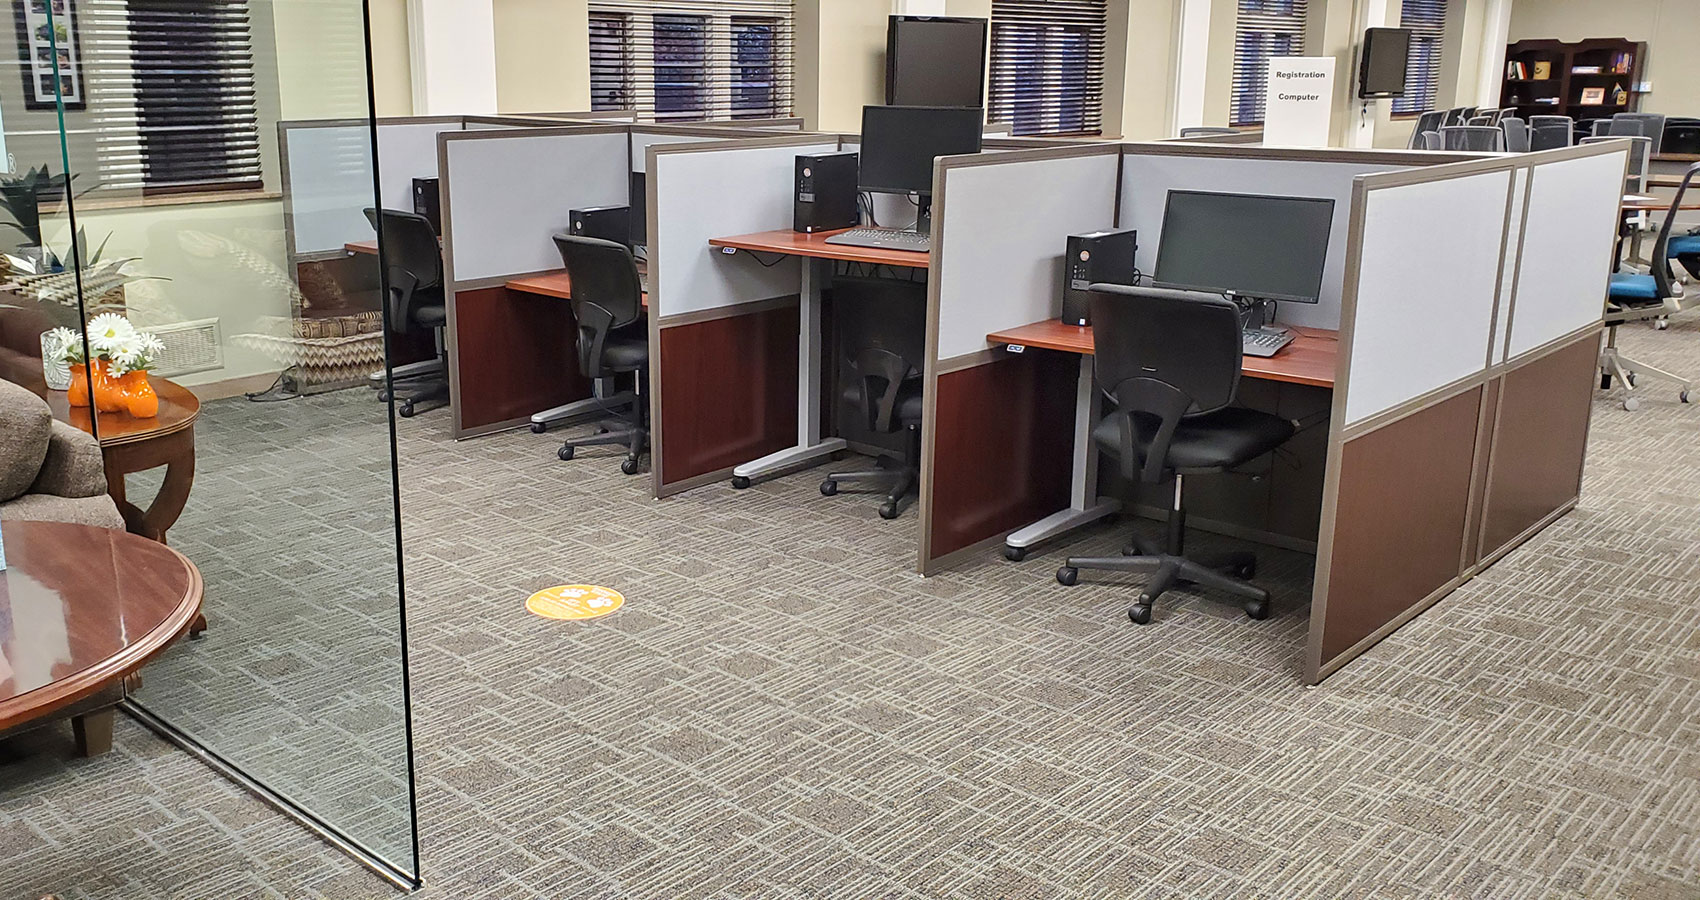 Four stations in the assistive technology lab equipped with computers and adjustable desks